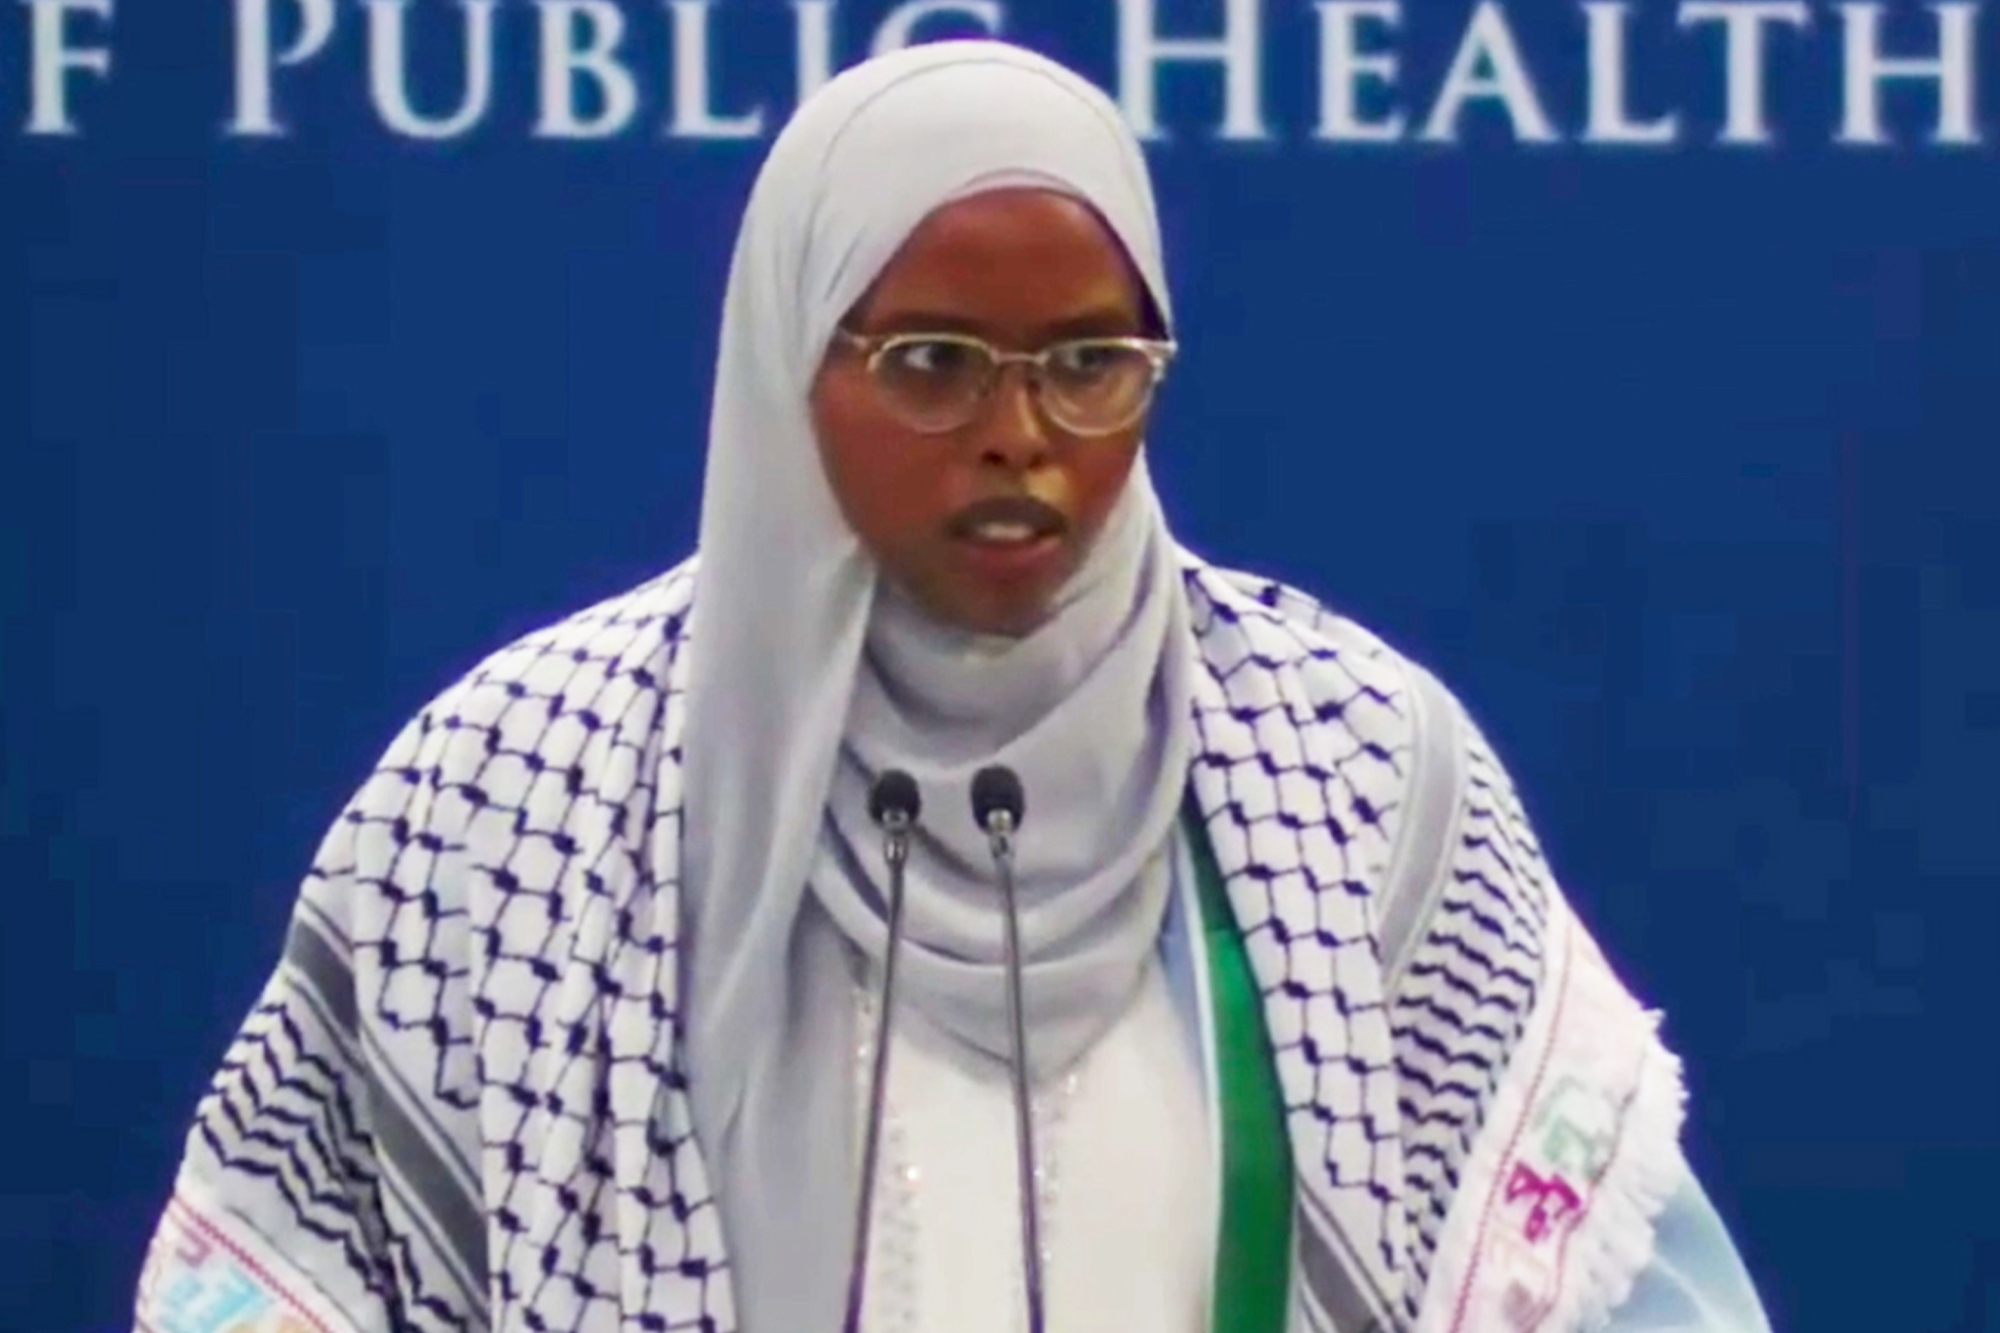 Microphone cuts off during Columbia grads anti-Israel commencement speech rant (Video)